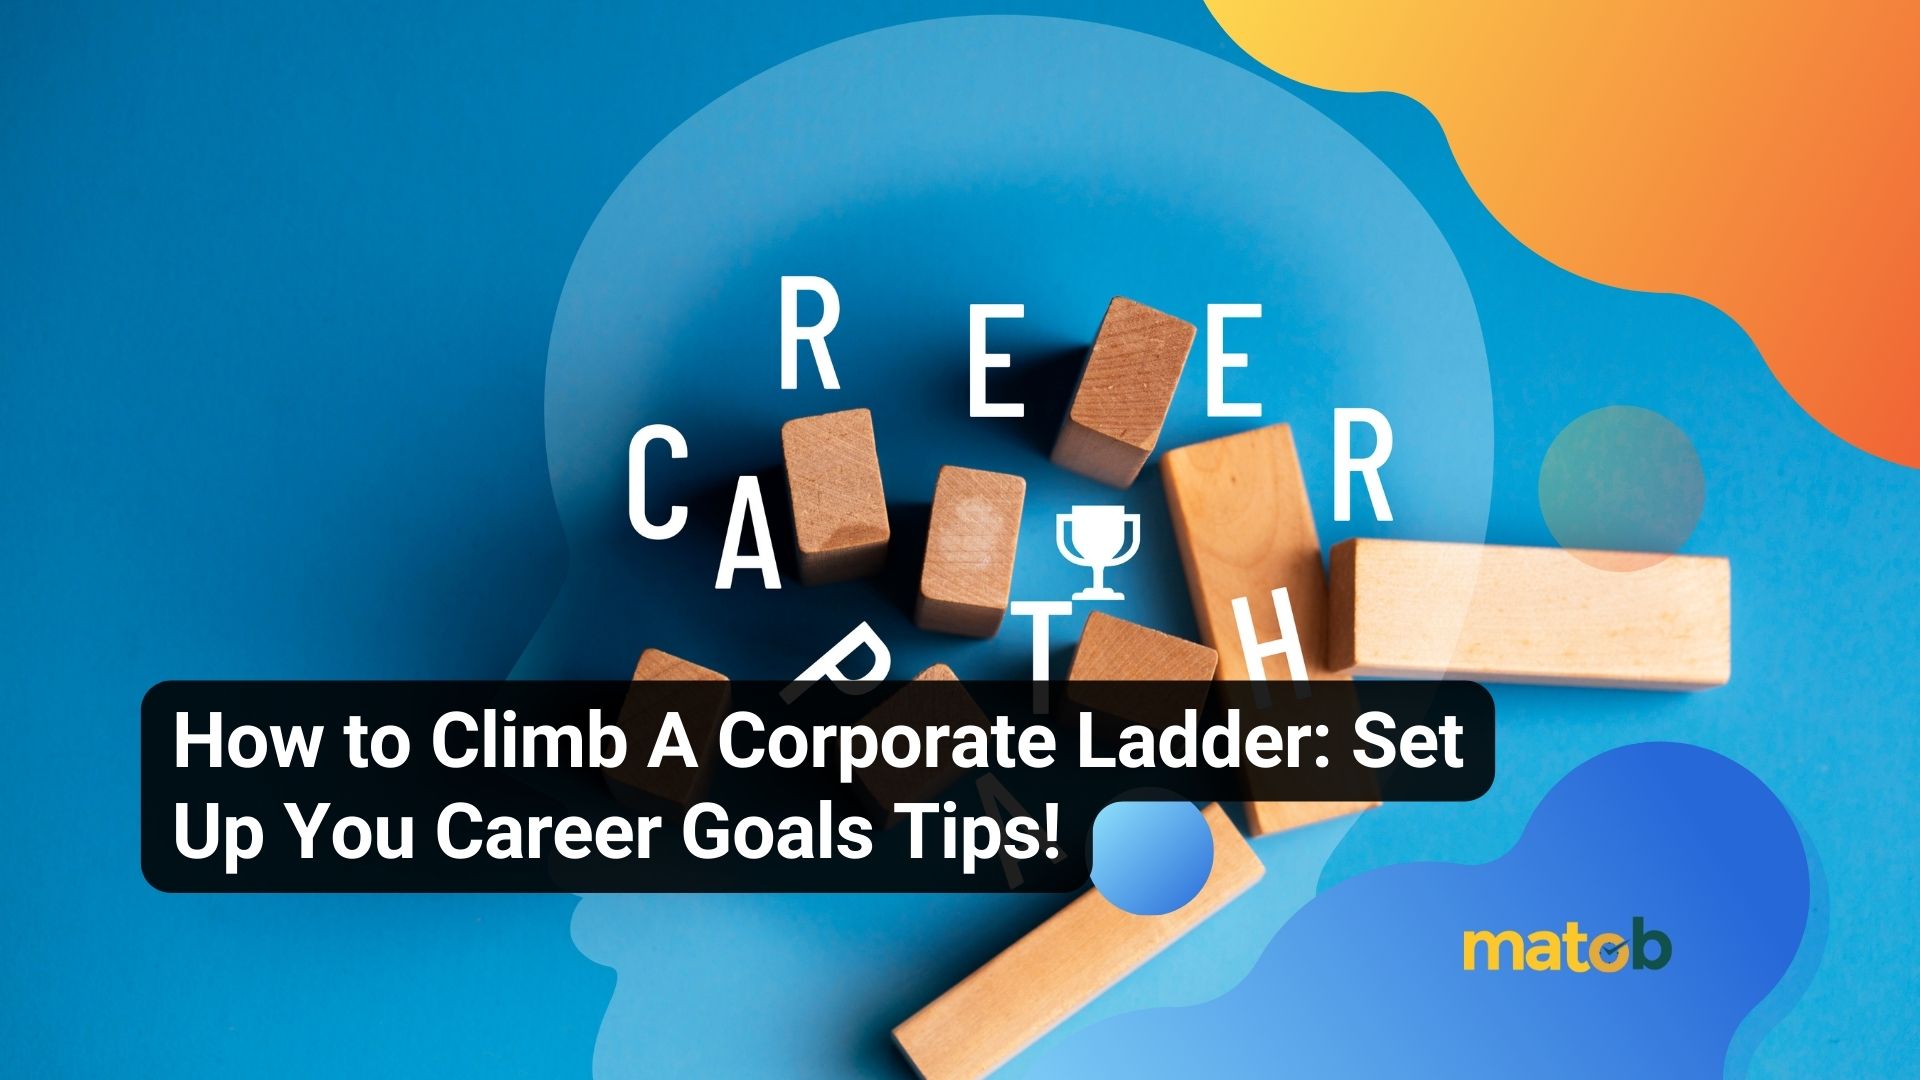 How to Climb A Corporate Ladder: Set Up You Career Goals Tips!